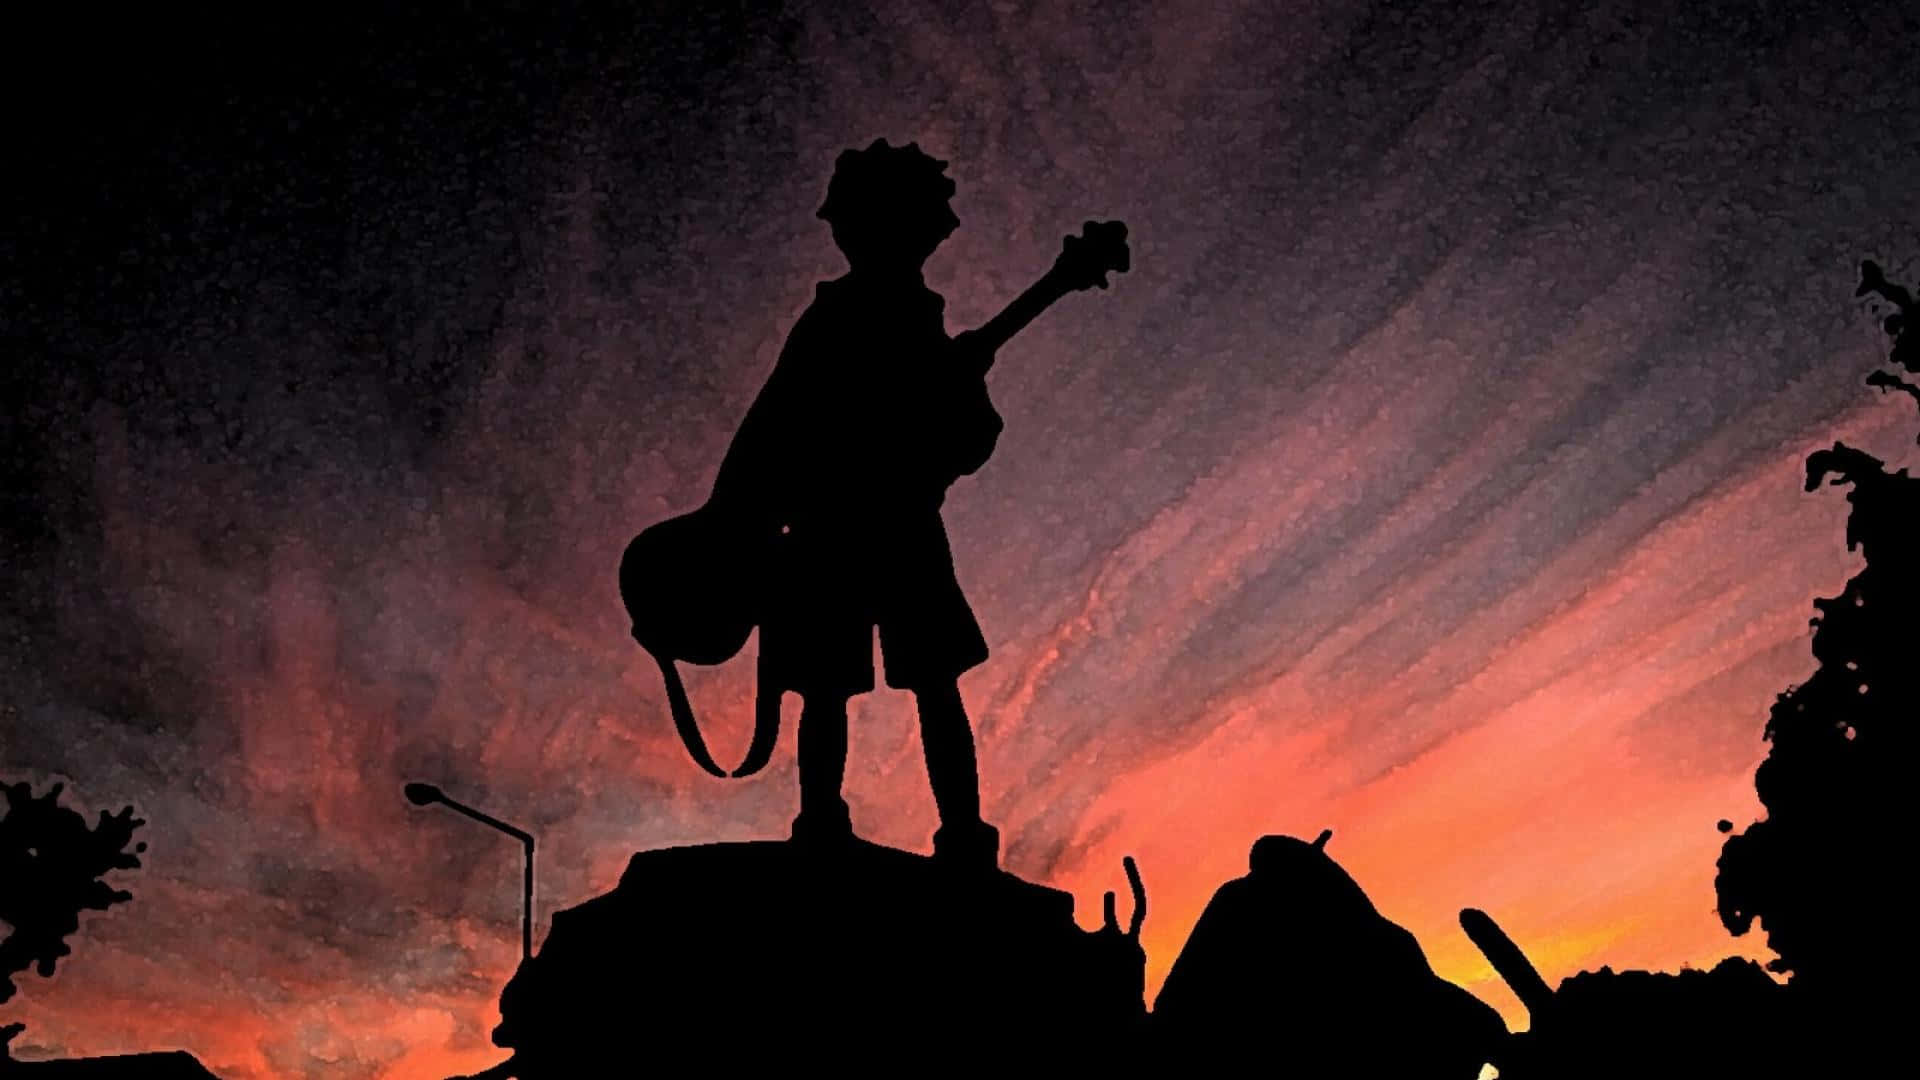 A Silhouette Of A Boy Holding A Guitar At Sunset